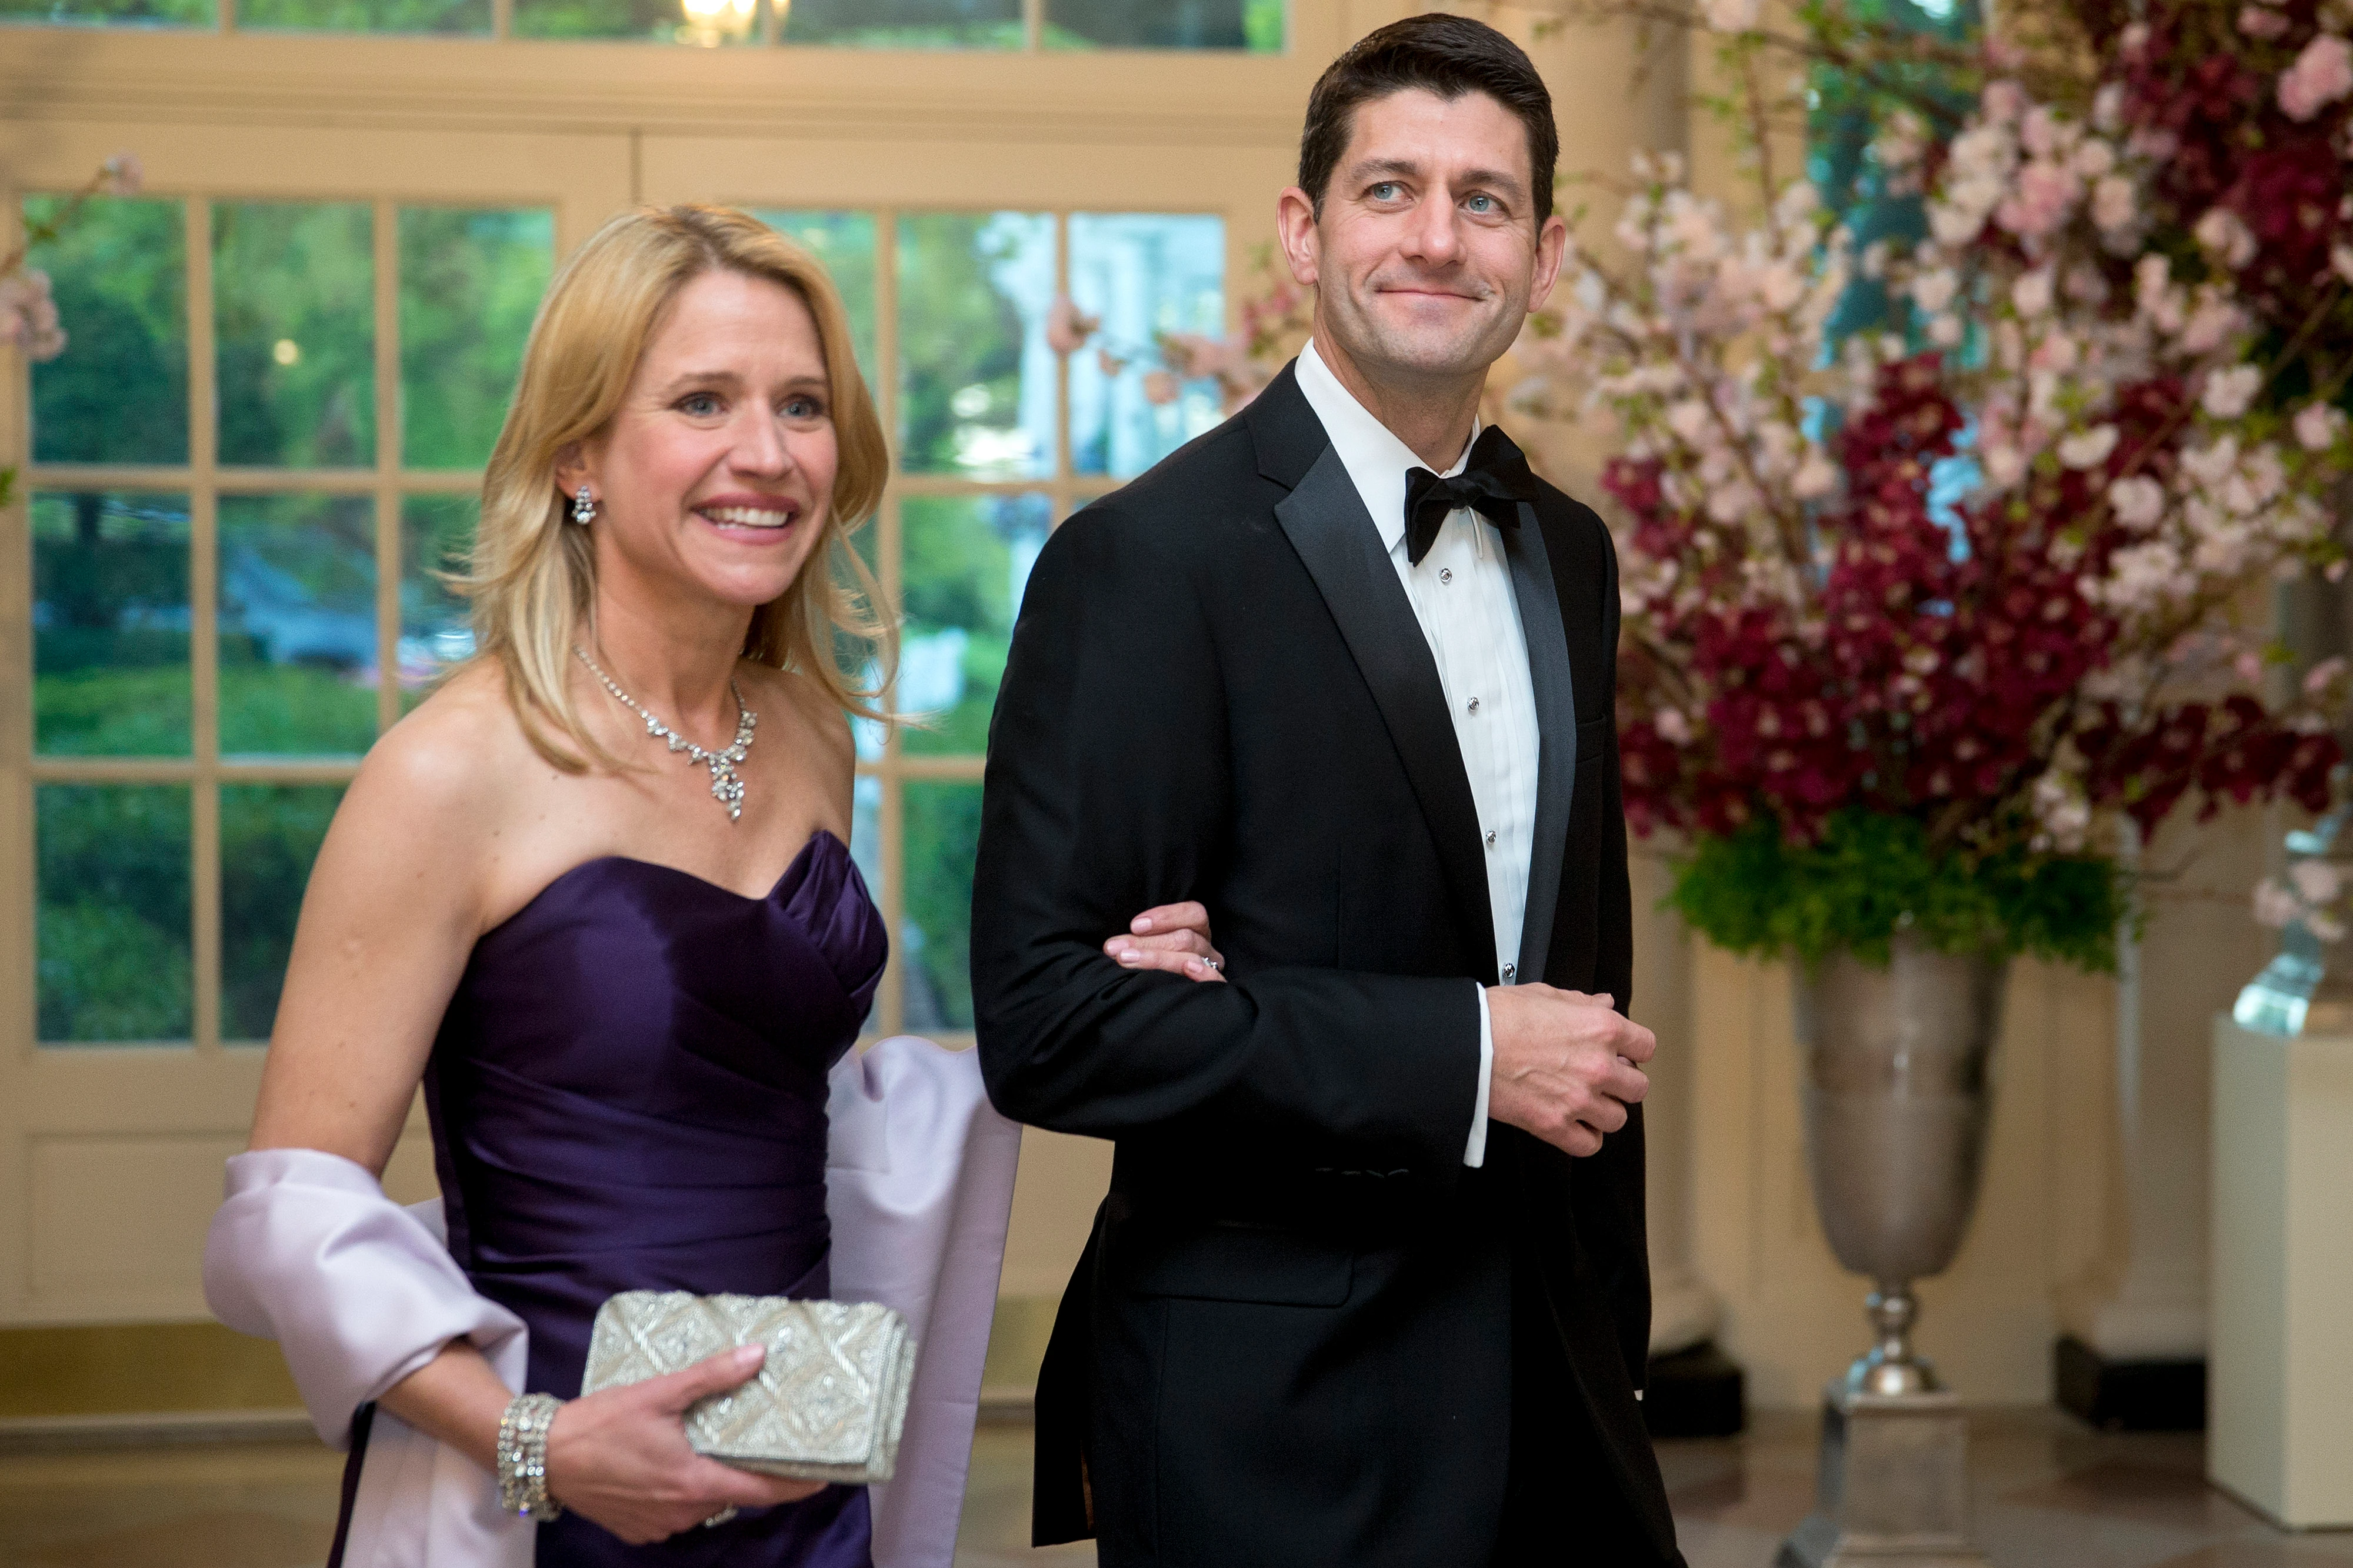 Paul Ryan and his wife Janna Little 